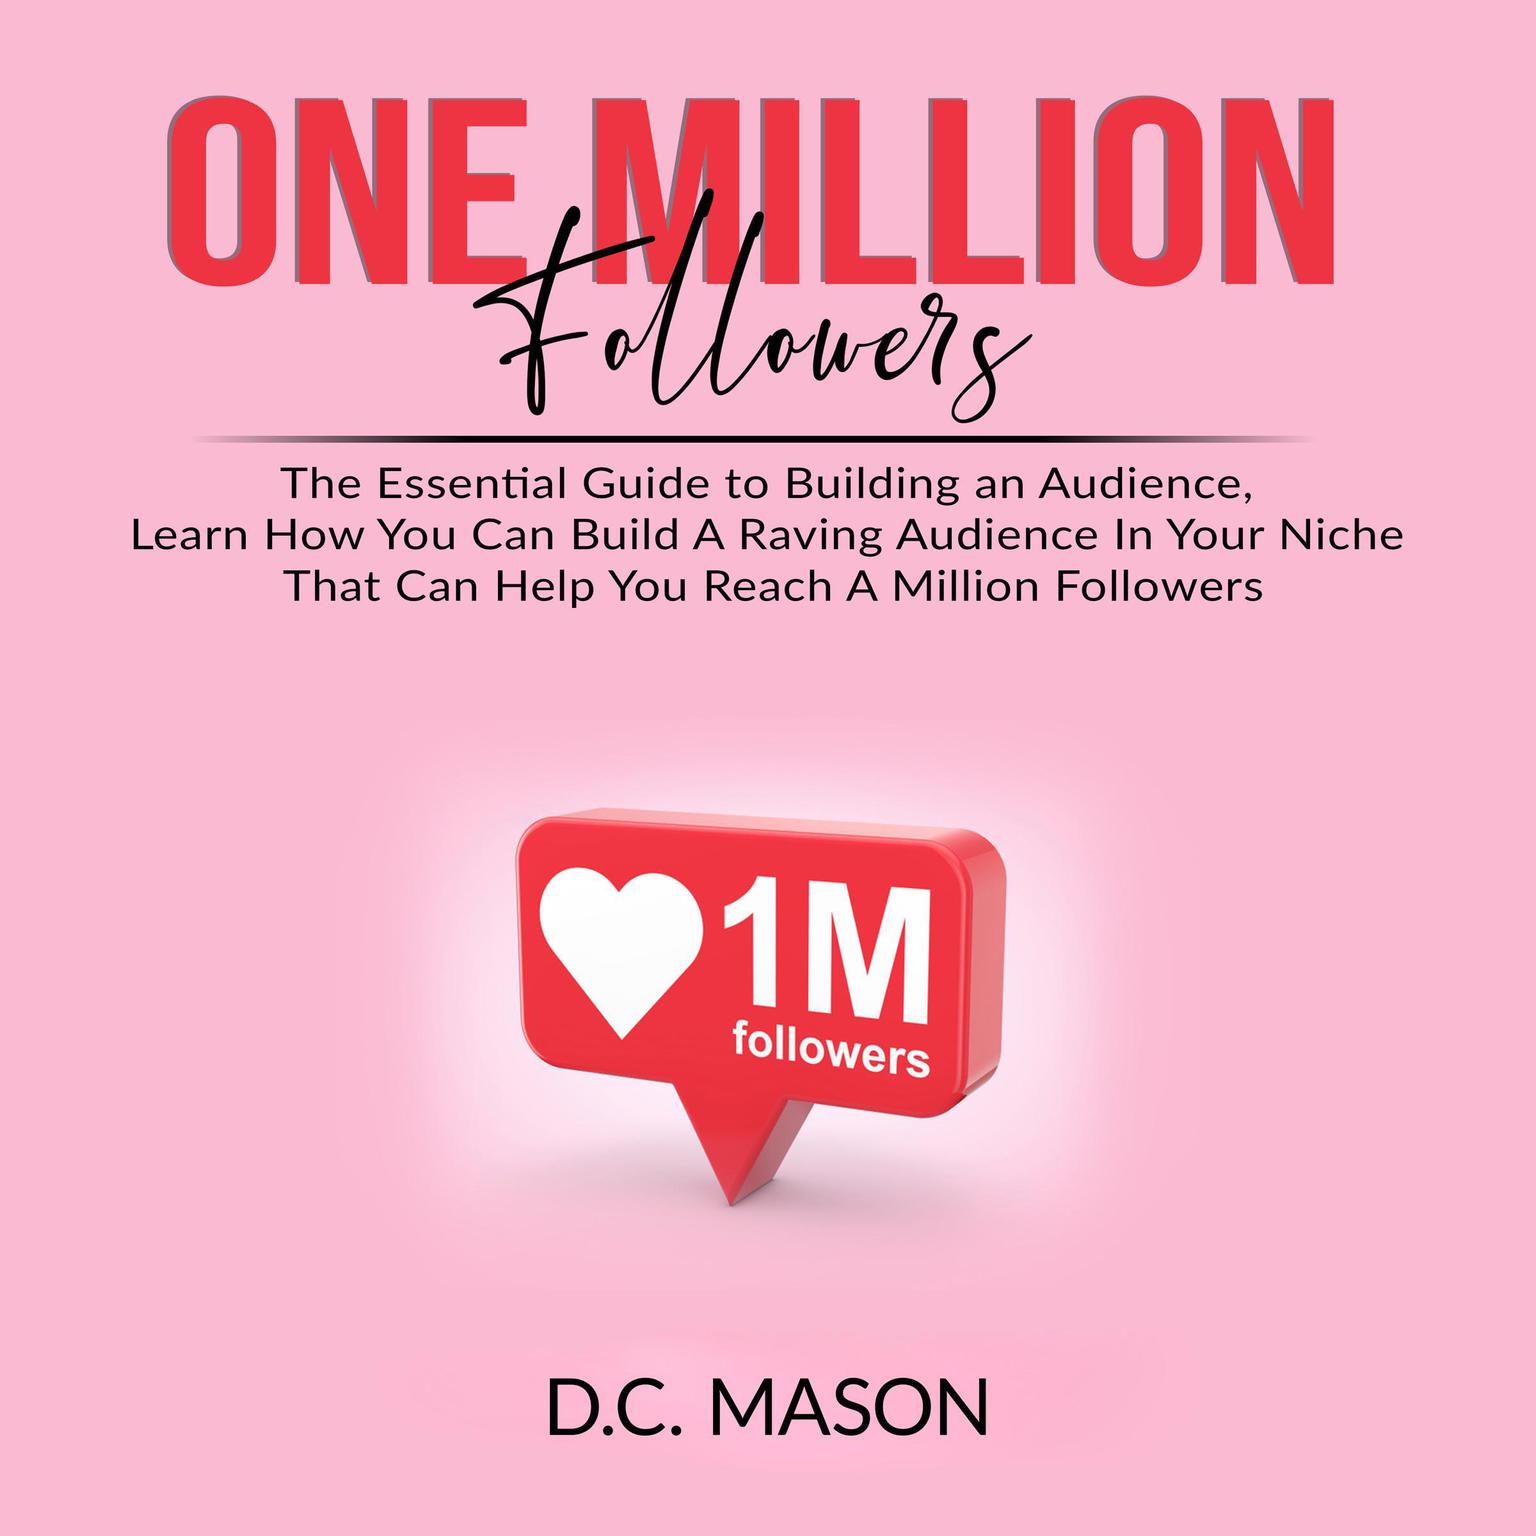 One Million Followers: The Essential Guide to Building an Audience, Learn How You Can Build A Raving Audience In Your Niche That Can Help You Reach A Million Followers Audiobook, by D.C. Mason